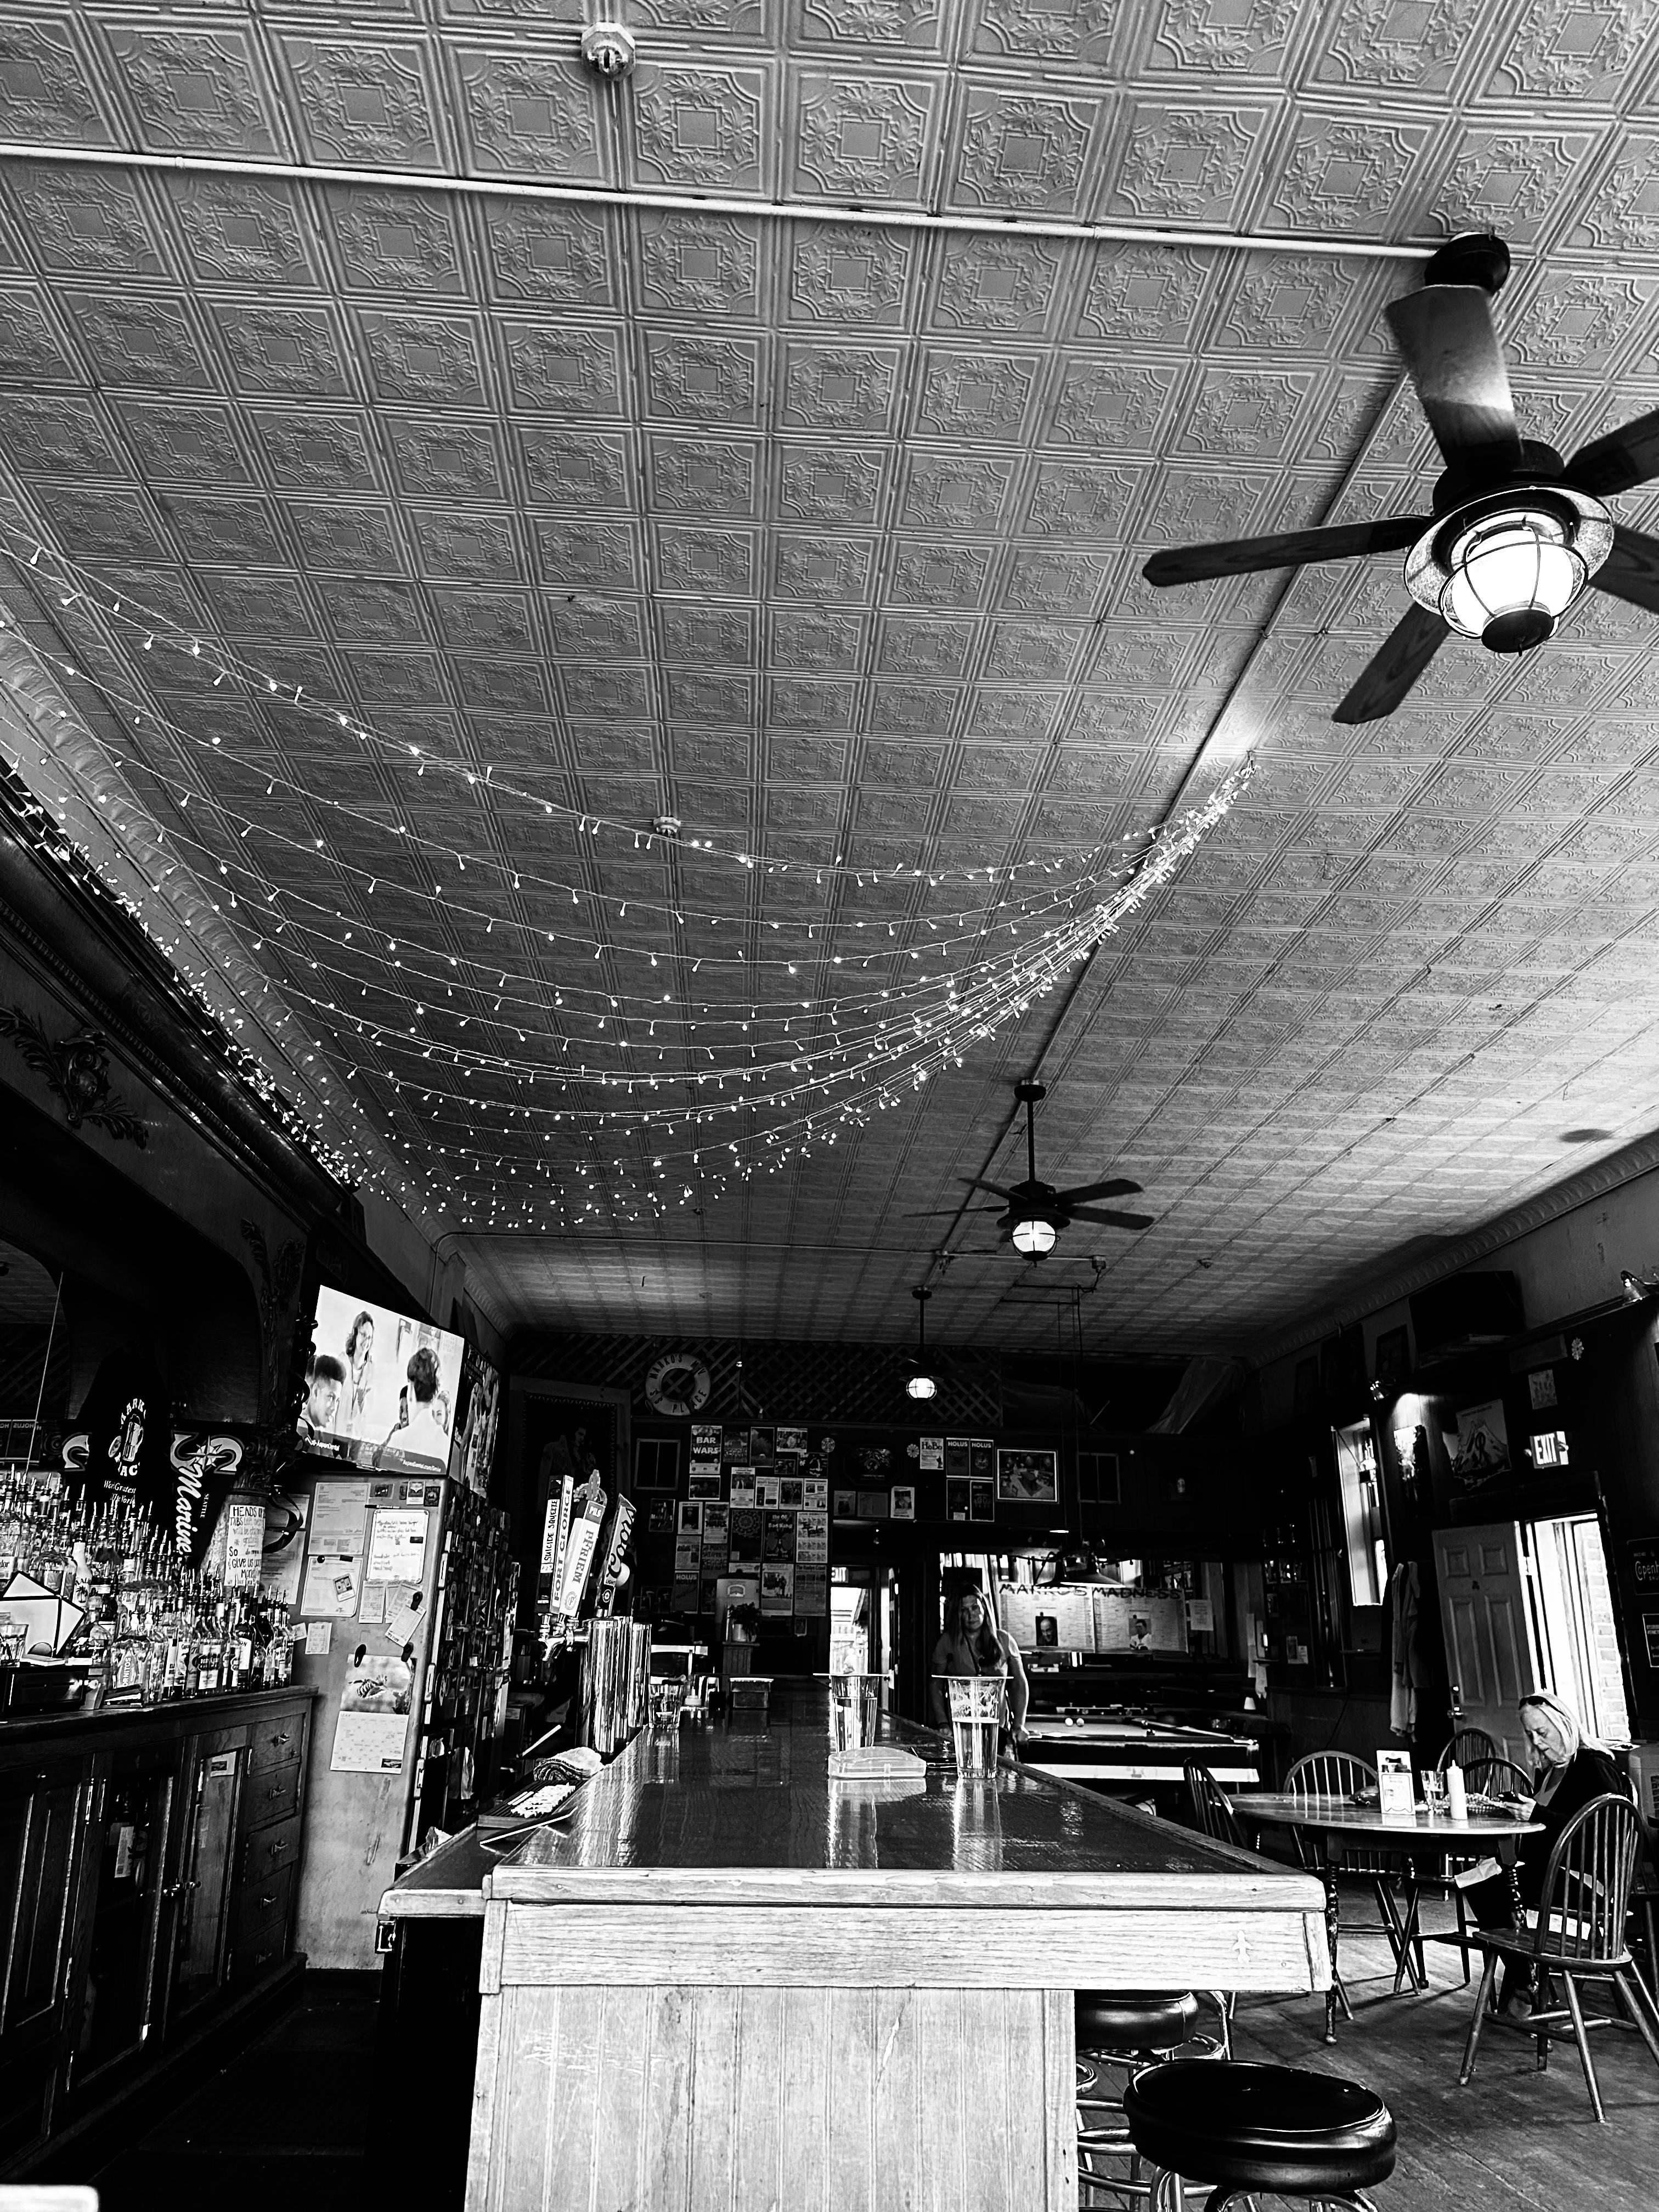 The locals bar is a quiet reprieve from the booming Memorial Day tourism boom happening just one block over.